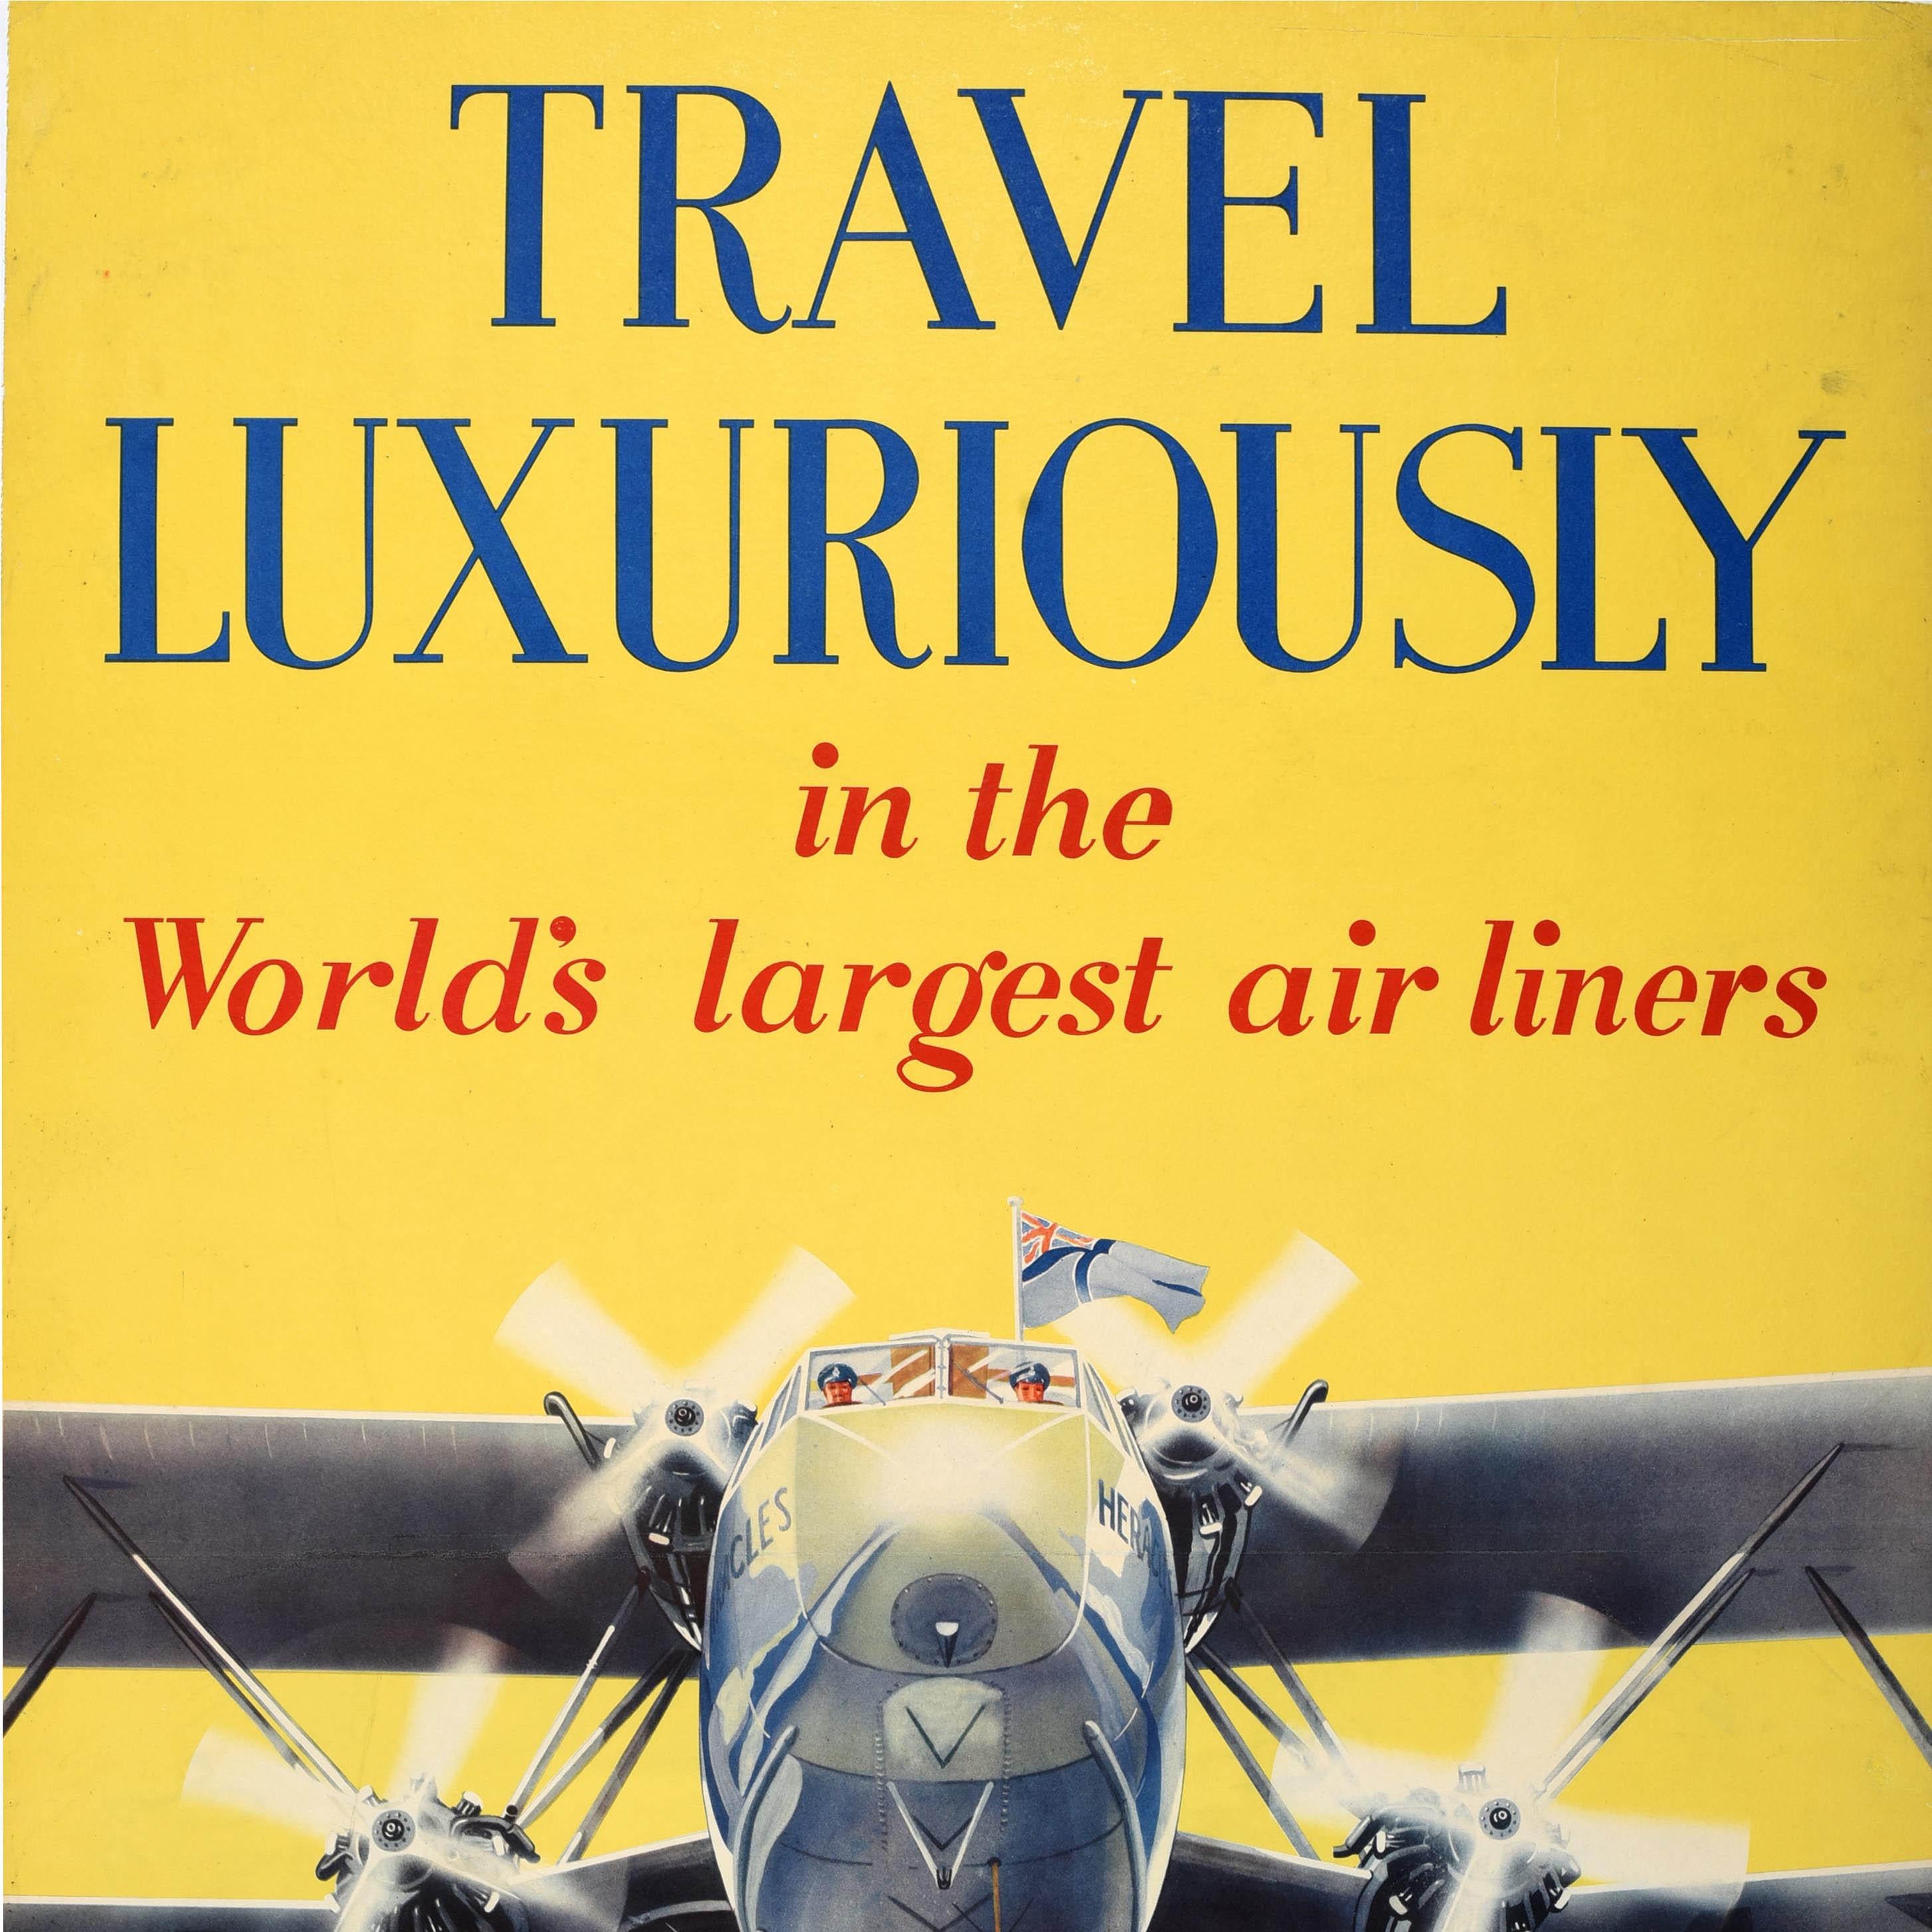 Original vintage travel advertising poster - Travel Luxuriously in the World's largest airliners Europe Africa India Far East Imperial Airways The Greatest Air Service in the World - featuring stunning artwork by the British artist Verney L. Danvers